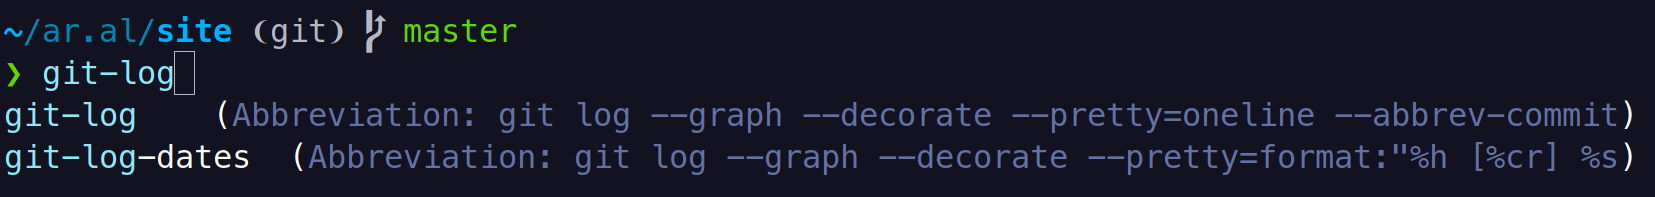 Screenshot of Fish shell suggesting abbreviation completions for the command get-lo: git-log (Abbreviation: git log --graph --decorate --pretty=oneline --abbrev-commit) and git-log-dates  (Abbreviation: git log --graph --decorate --pretty=format:"%h [%cr] %s)